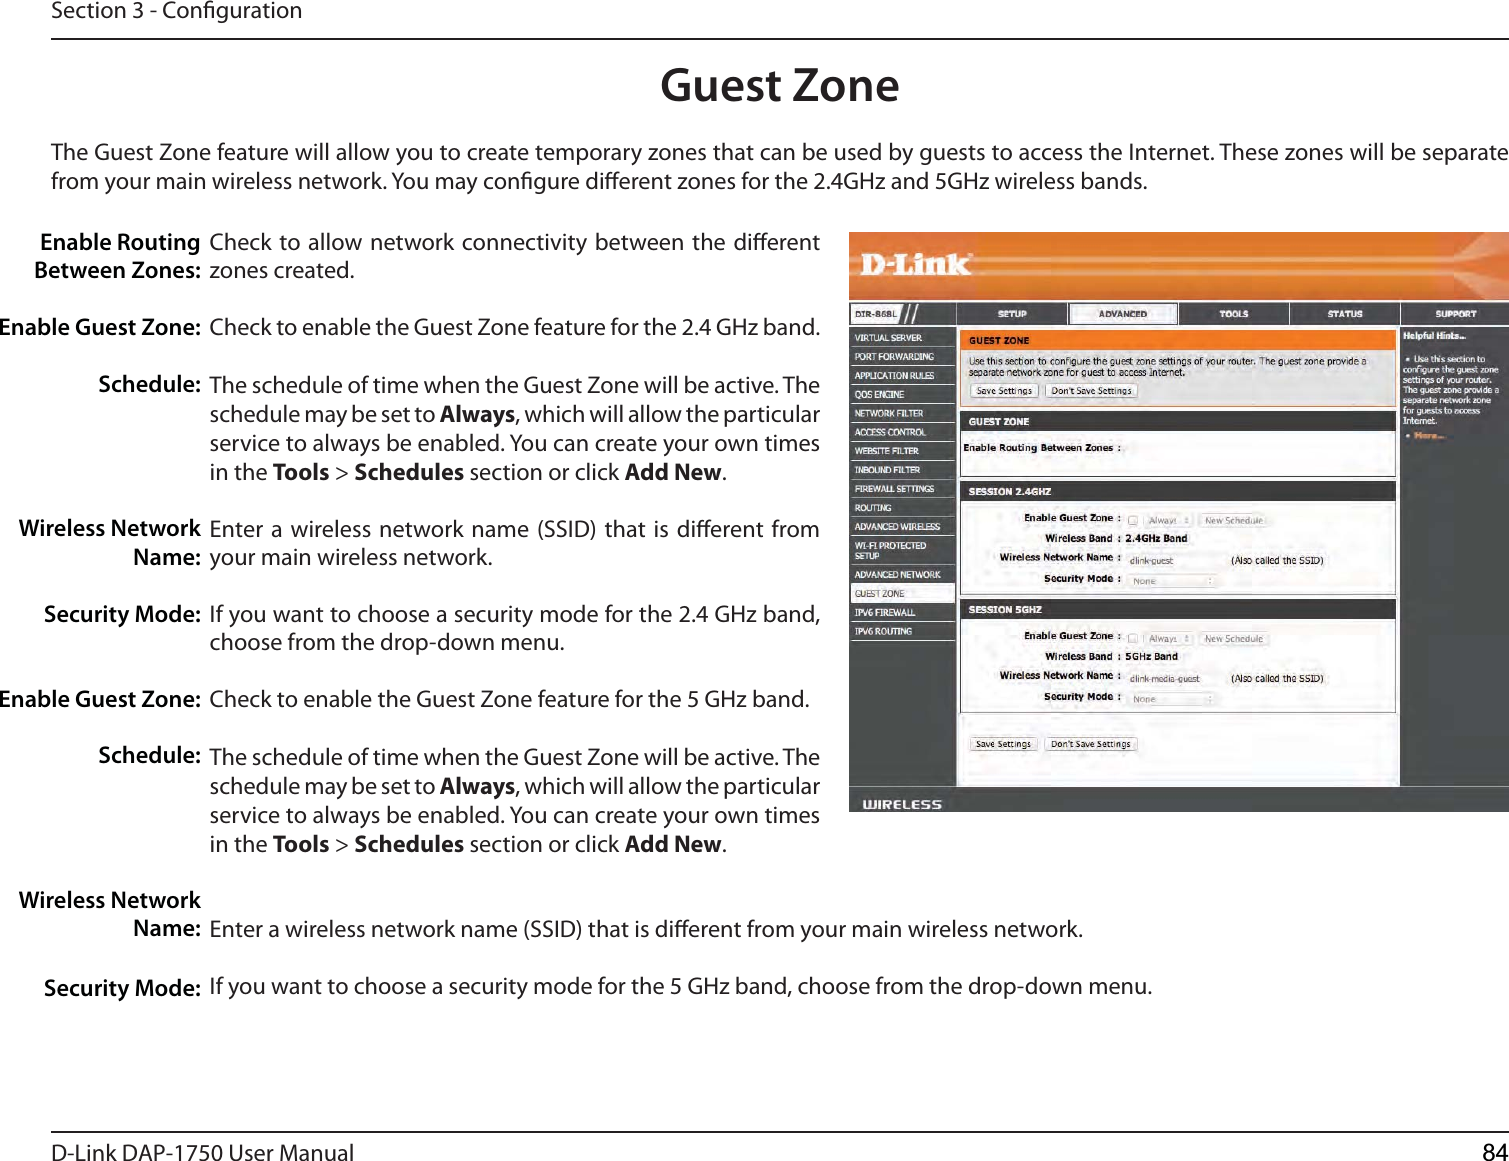 D-Link %&quot;1 User ManualSection 3 - CongurationGuest ZoneCheck to allow network connectivity between the dierent zones created. Check to enable the Guest Zone feature for the 2.4 GHz band.The schedule of time when the Guest Zone will be active. The schedule may be set to Always, which will allow the particular service to always be enabled. You can create your own times in the Tools &gt; Schedules section or click Add New.Enter a wireless network name (SSID) that is dierent from your main wireless network.If you want to choose a security mode for the 2.4 GHz band, choose from the drop-down menu.Check to enable the Guest Zone feature for the 5 GHz band.The schedule of time when the Guest Zone will be active. The schedule may be set to Always, which will allow the particular service to always be enabled. You can create your own times in the Tools &gt; Schedules section or click Add New.Enter a wireless network name (SSID) that is dierent from your main wireless network.If you want to choose a security mode for the 5 GHz band, choose from the drop-down menu.Enable Routing Between Zones:Enable Guest Zone:Schedule:Wireless Network Name:Security Mode:Enable Guest Zone:Schedule:Wireless Network Name:Security Mode:The Guest Zone feature will allow you to create temporary zones that can be used by guests to access the Internet. These zones will be separate from your main wireless network. You may congure dierent zones for the 2.4GHz and 5GHz wireless bands.84